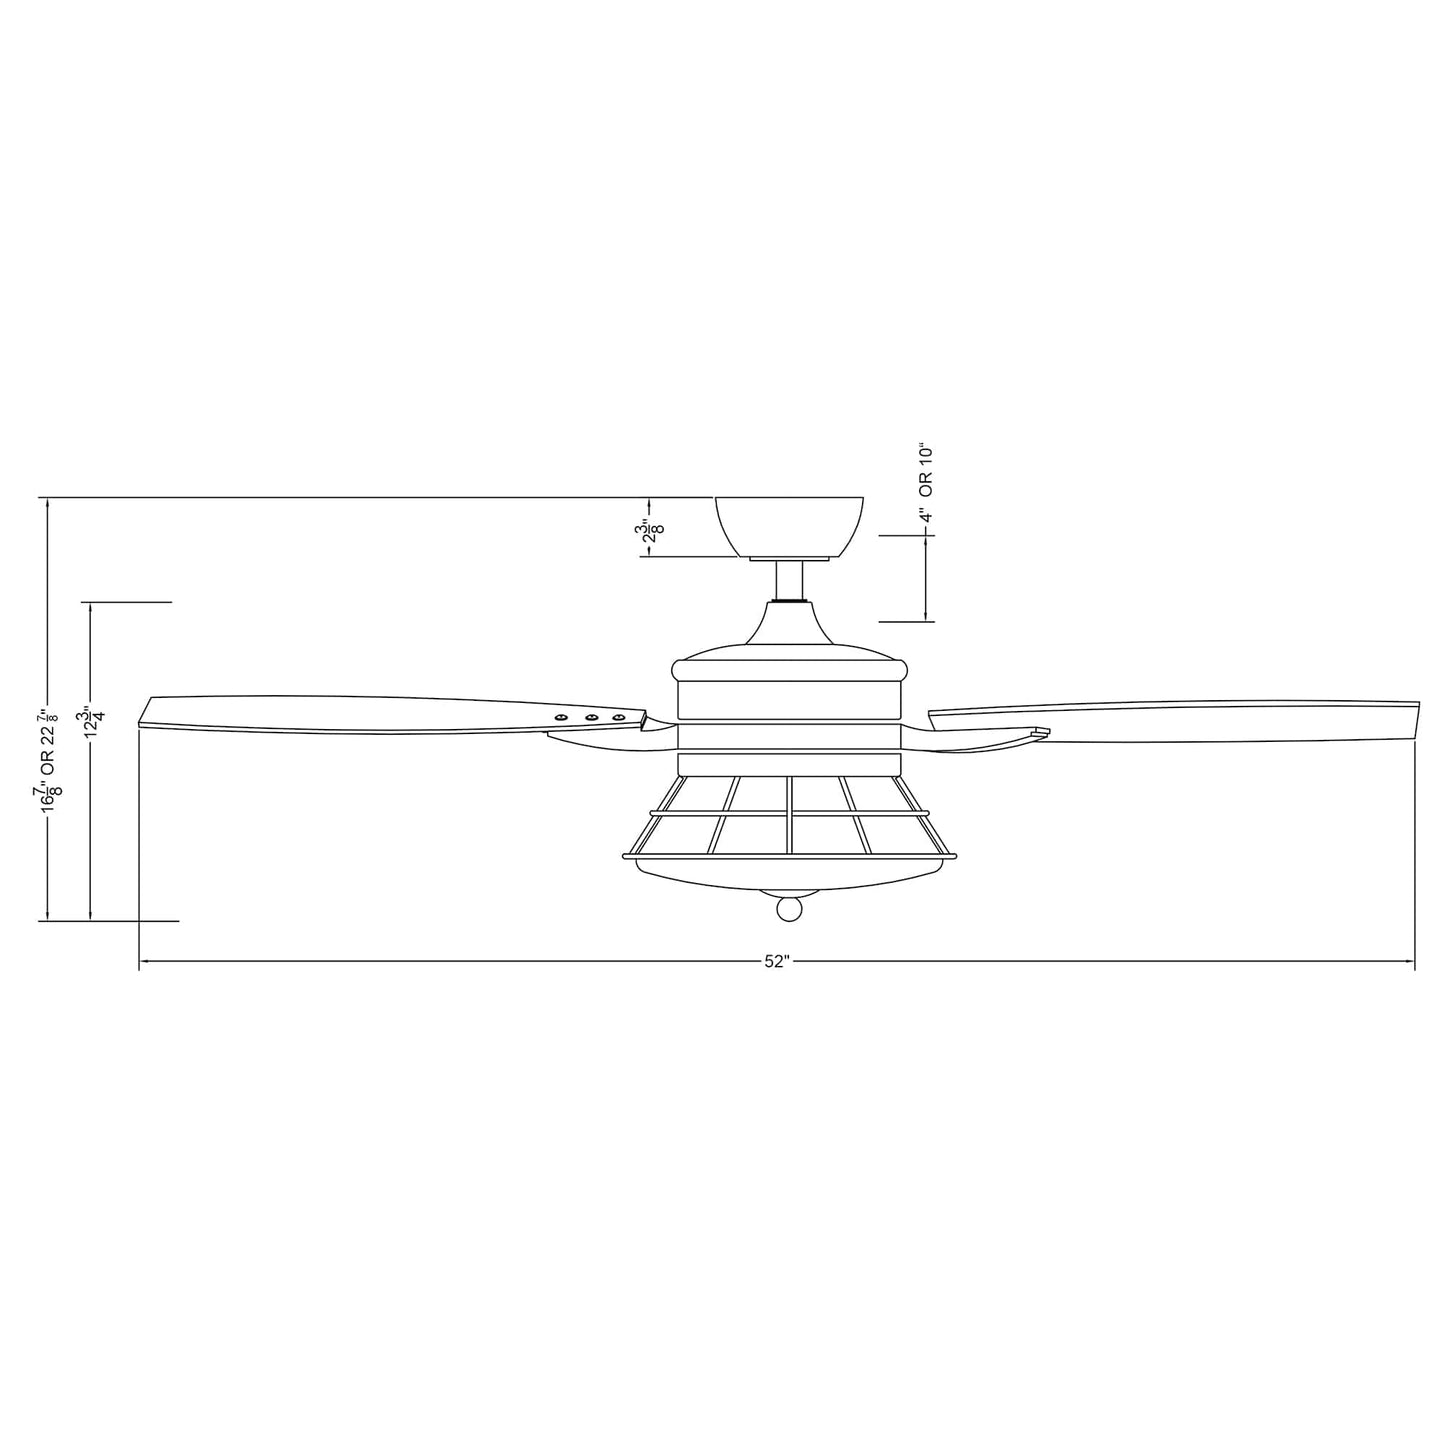 Parrot Uncle 52" Antone Industrial Downrod Mount Reversible Ceiling Fan with Lighting and Remote Control